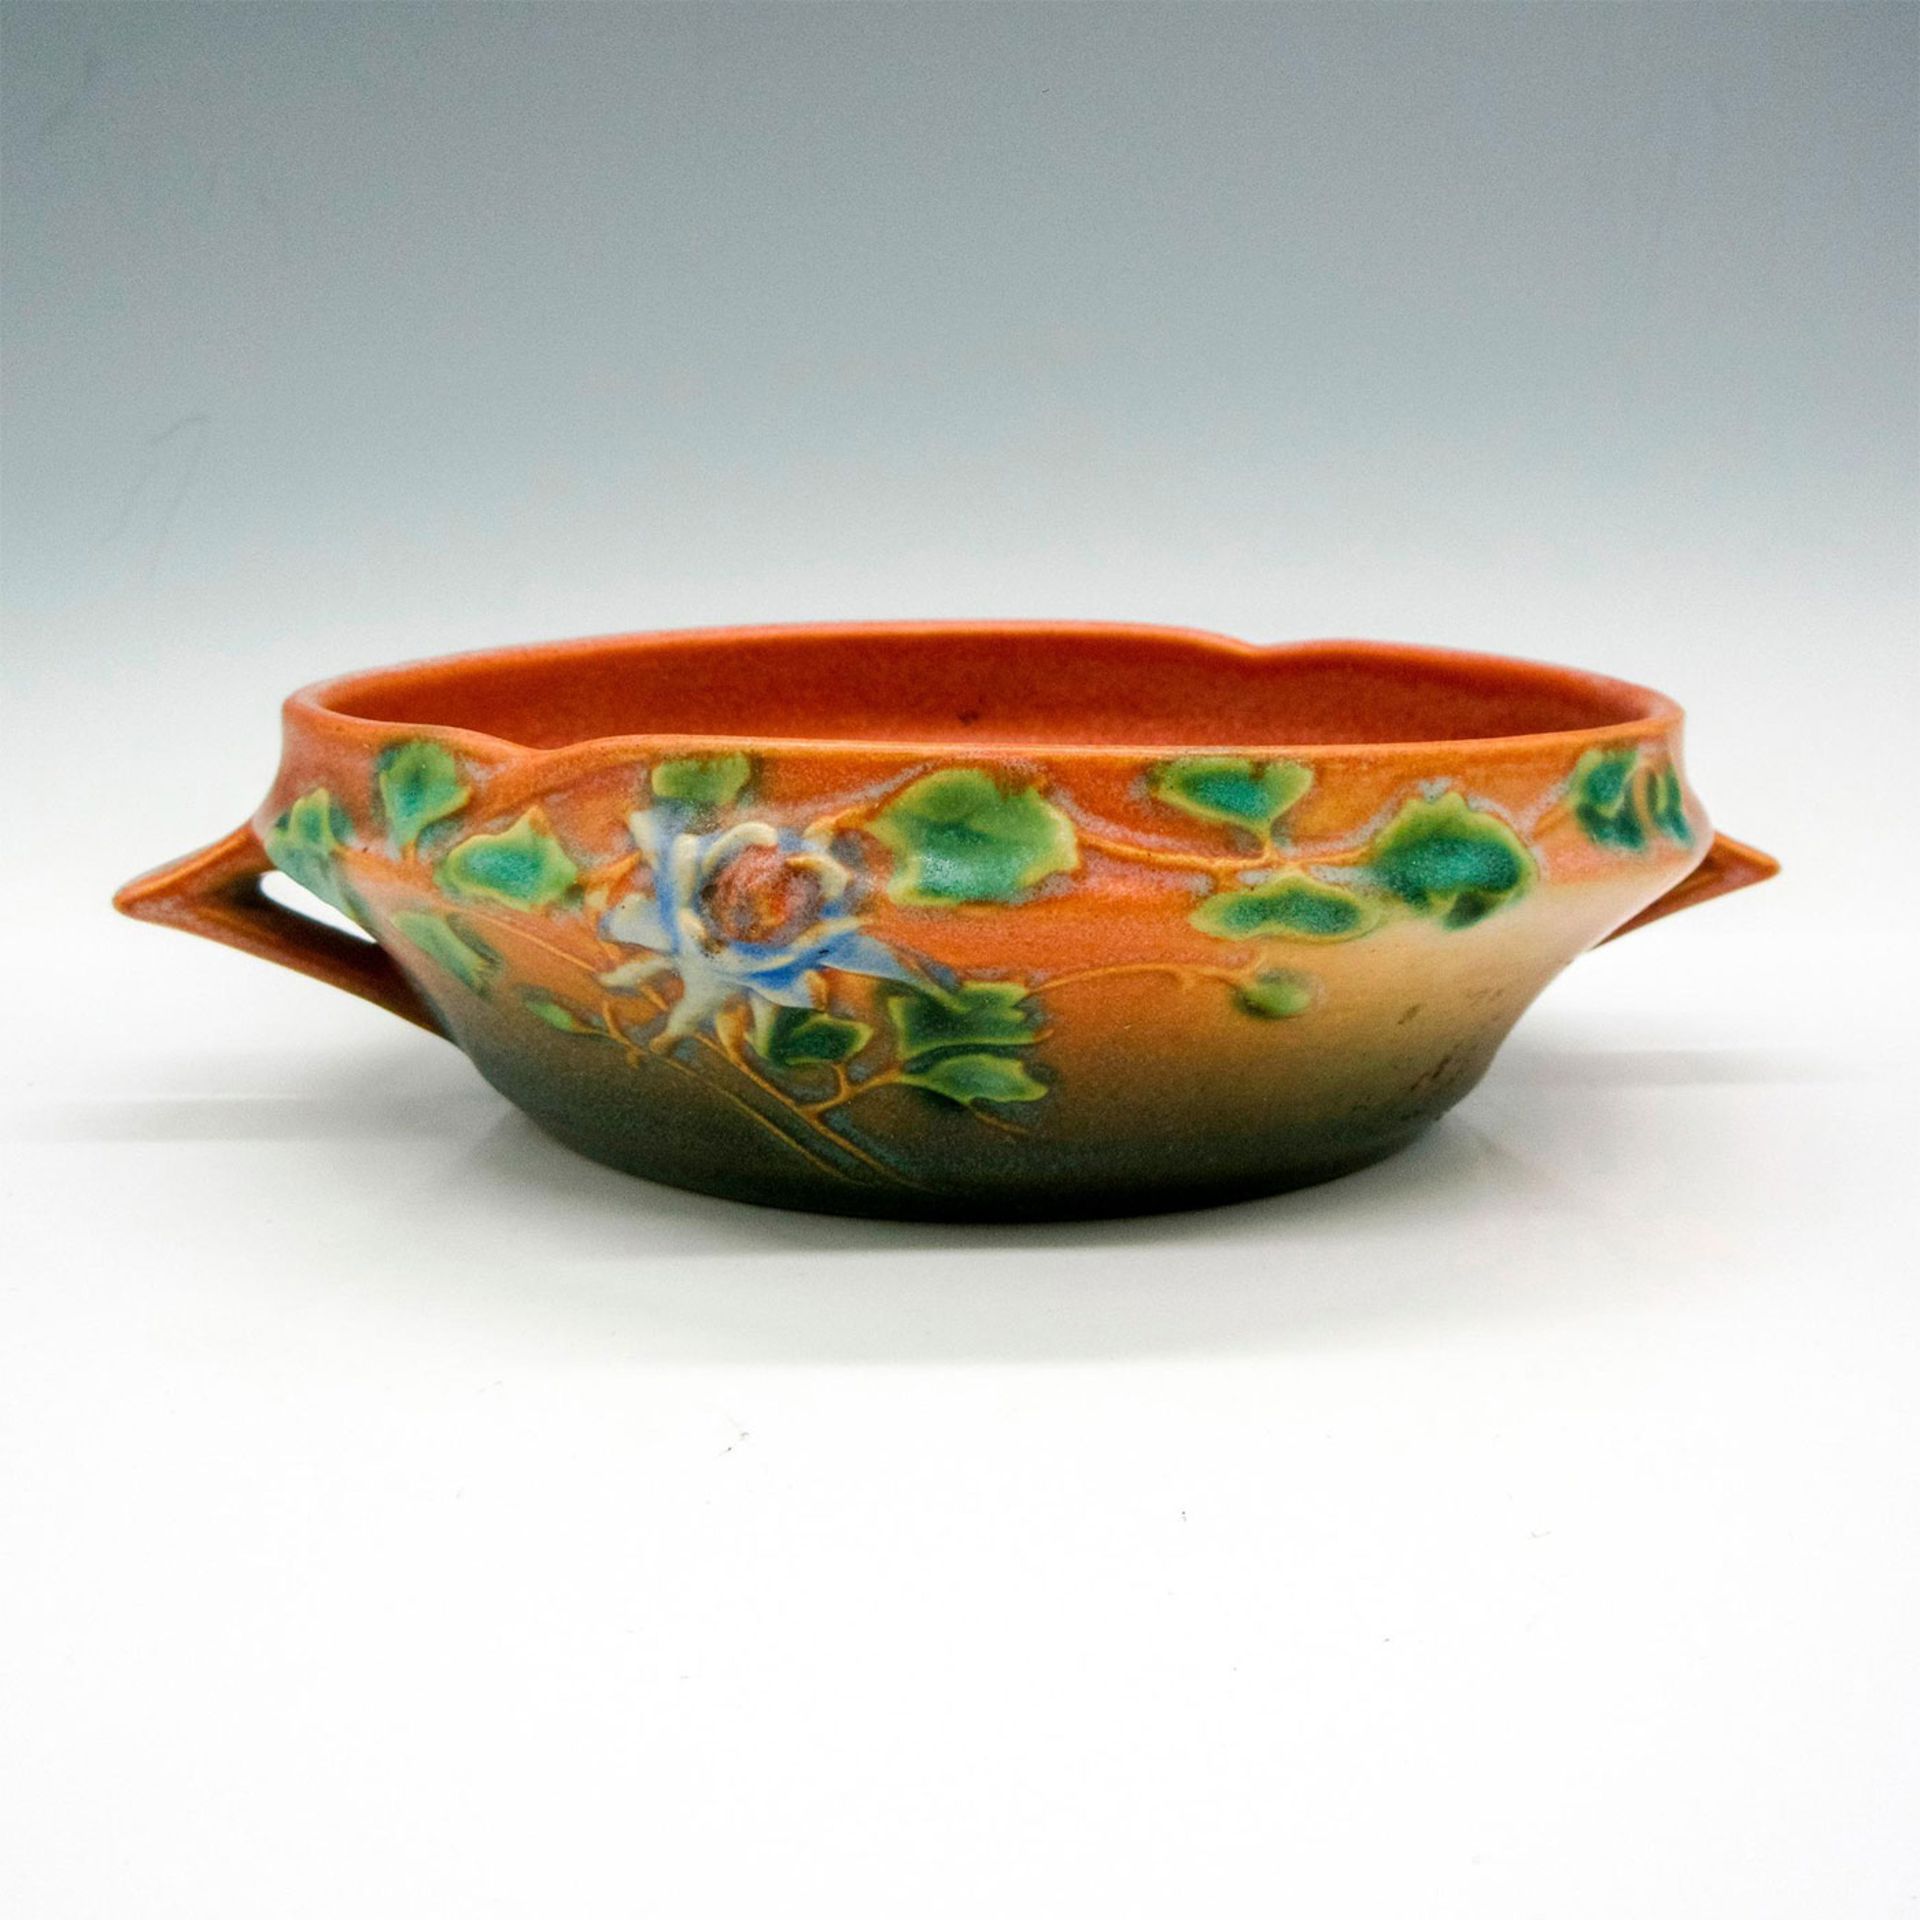 Roseville Pottery Double Handled Bowl, Columbine - Image 2 of 3